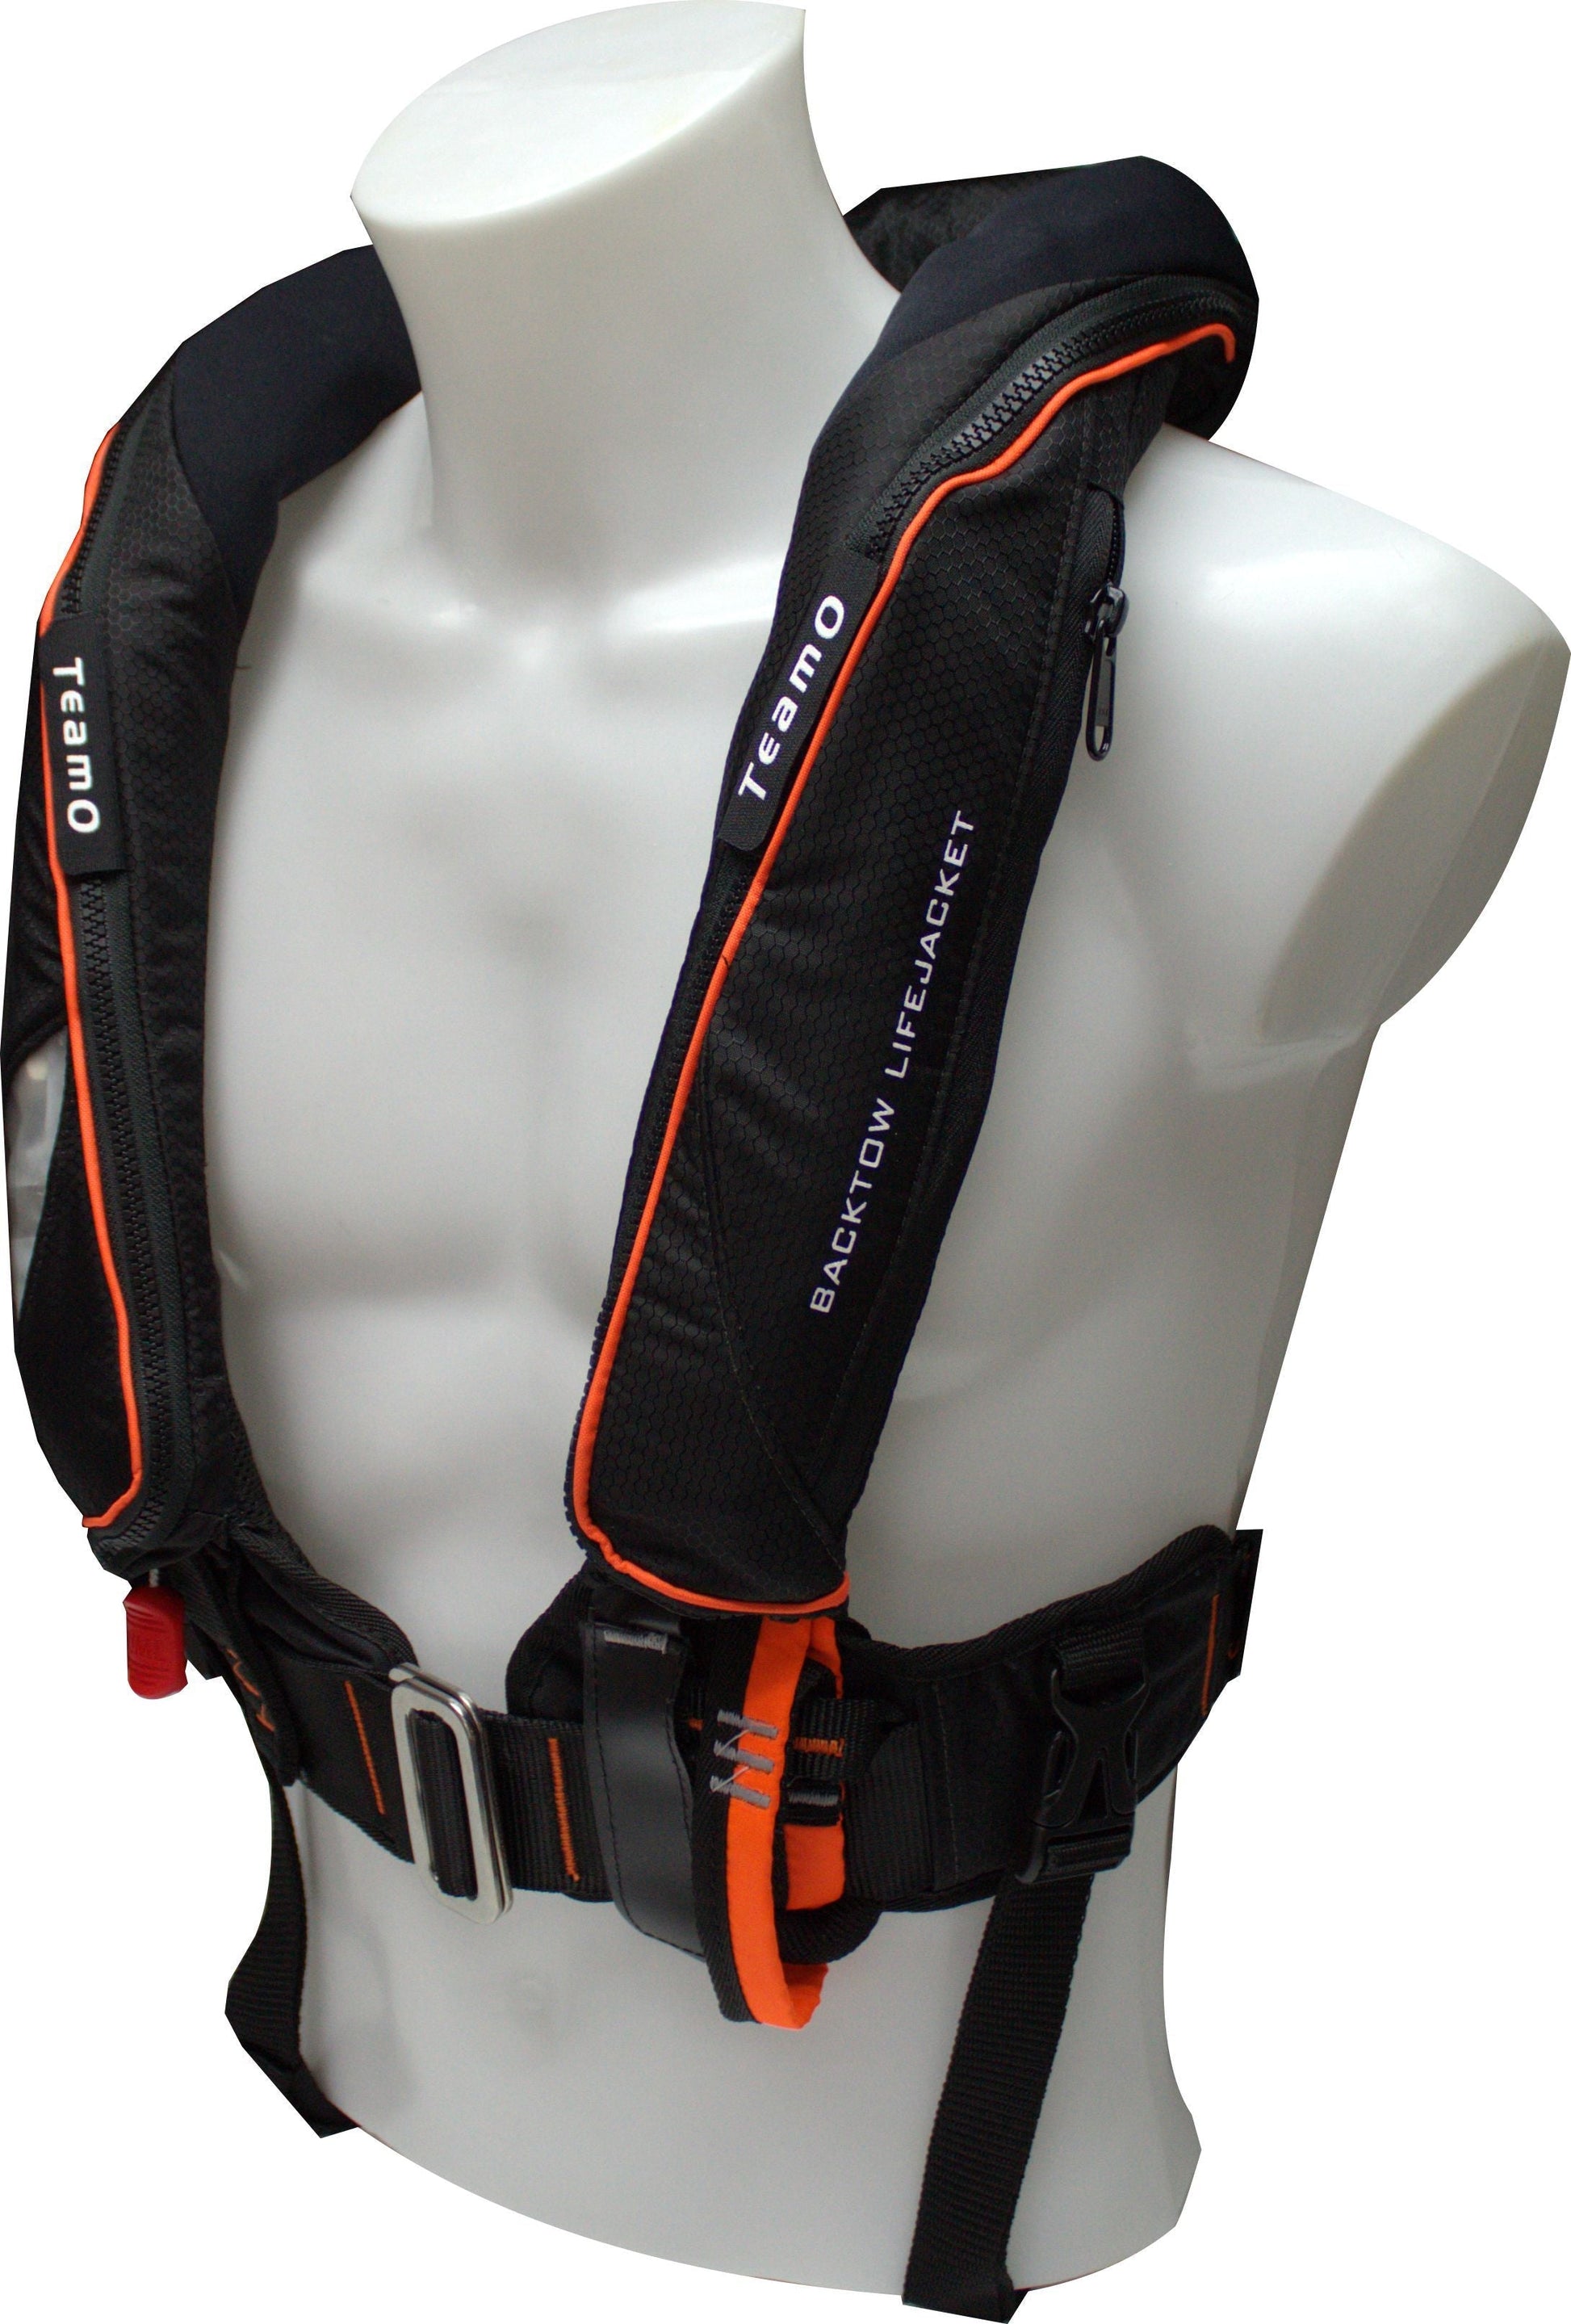 170N BackTow inflatable PFD in Black | Side angle